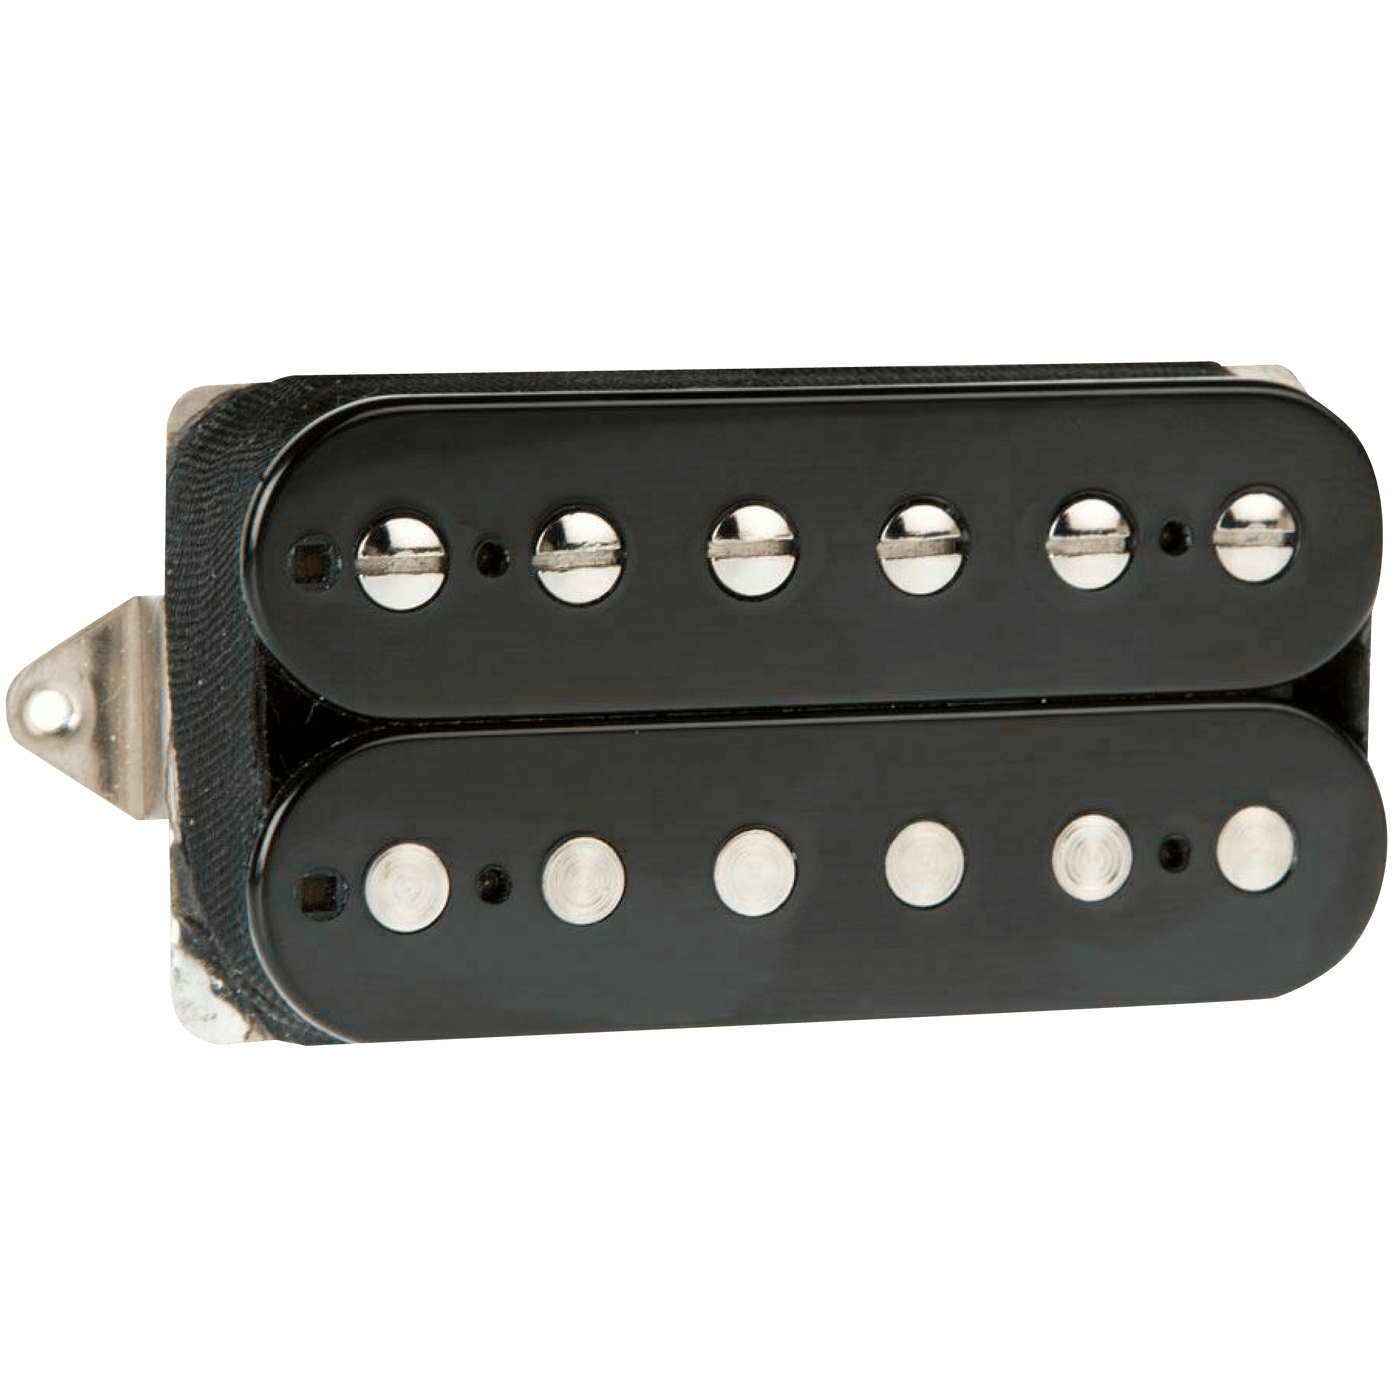 Suhr Thornbucker Plus Signature Humbucker Black (Bridge) - $169990 - Gearhub - “We are happy to introduce the new Thornbucker + bridge pickup. It retains all the clarity, warmth, character, and mojo of the original Thornbuckers, and adds a bit more power and oomph. Great for players that like a slightly overwound PAF-type tone!”. “We’re overjoyed with the enthusiasm from players for the Thornbucker humbucking pickups! The pickups have been a resounding success, garnering praise for their extraordinary tone